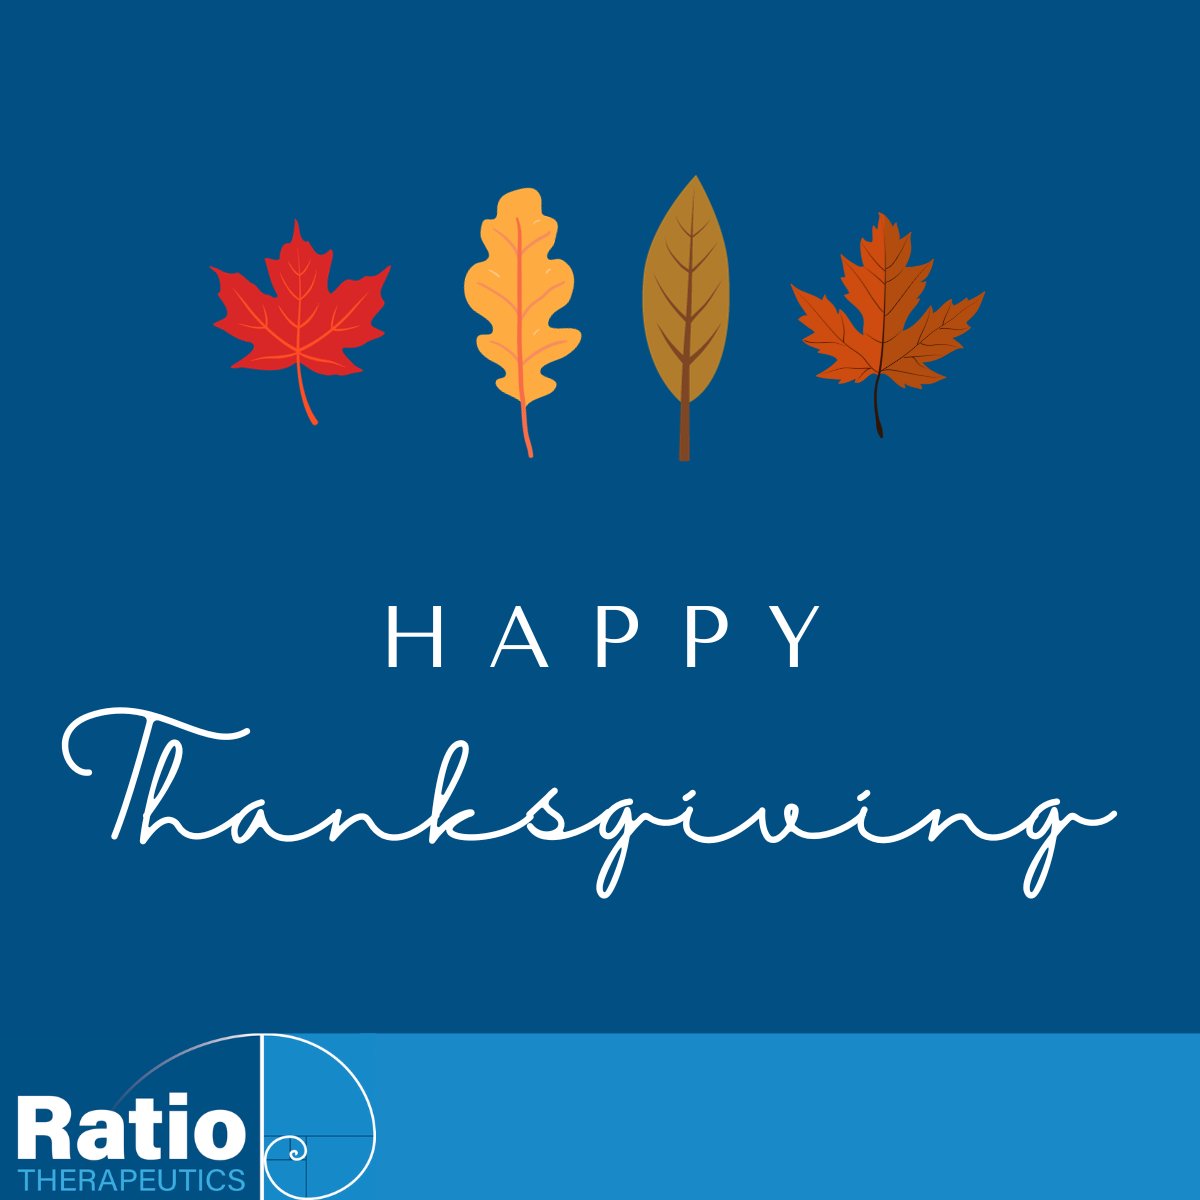 Happy Thanksgiving from everyone at Ratio! We’re thankful for all our friends and family who support us in working towards our mission: to develop innovative #cancertherapies that extend life while maintaining quality for #cancerpatients around the world.

ratiotx.com